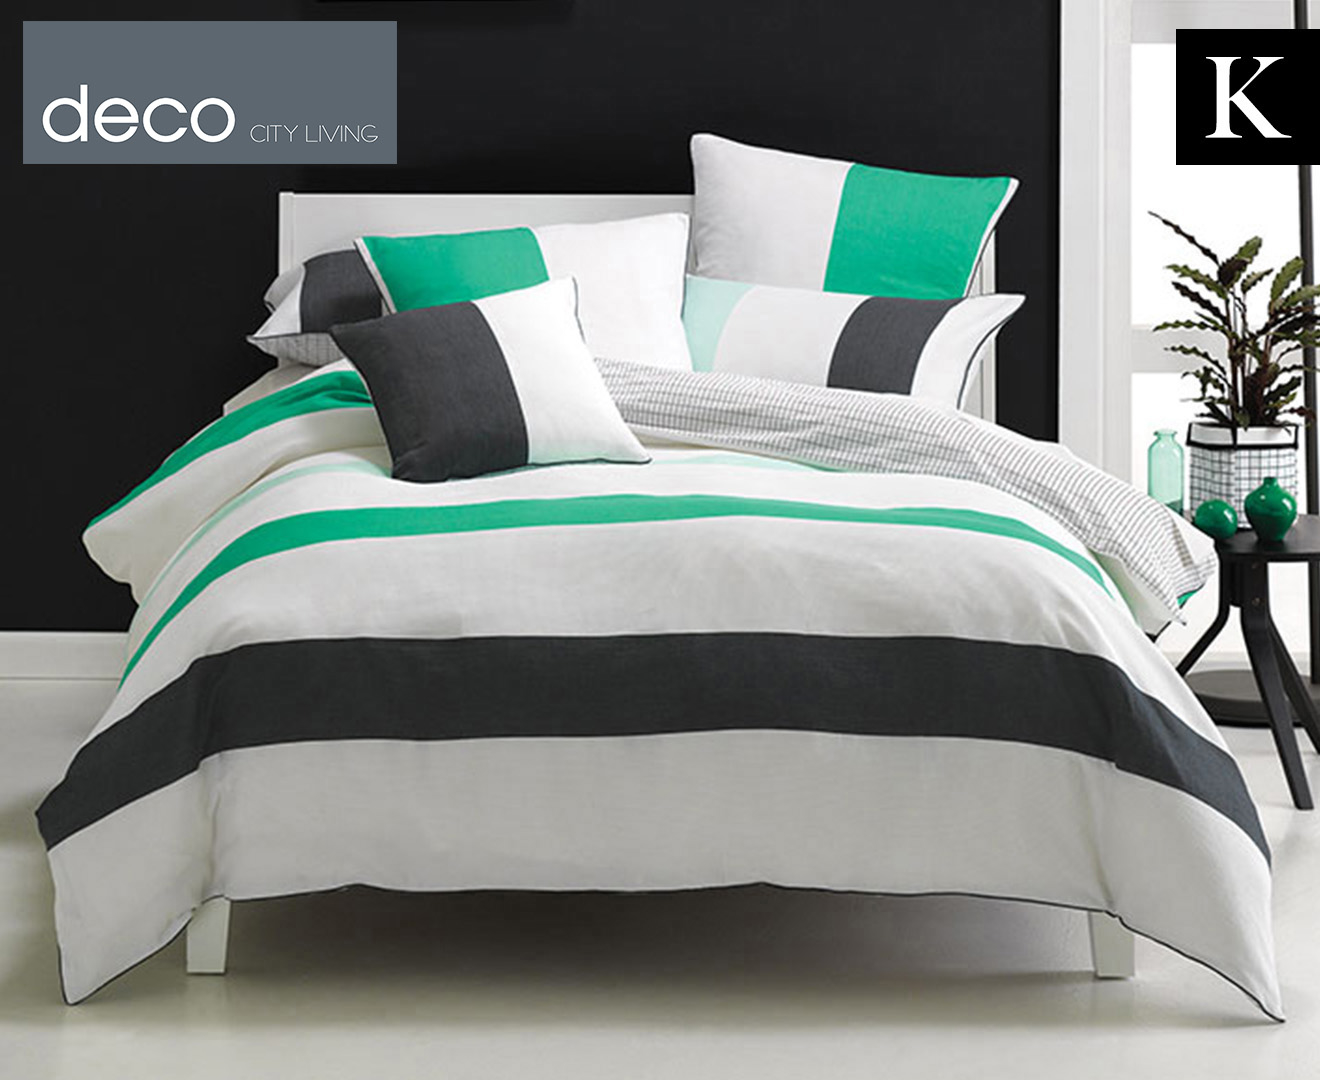 Deco City Living Wesley King Bed Quilt Cover Set - Green